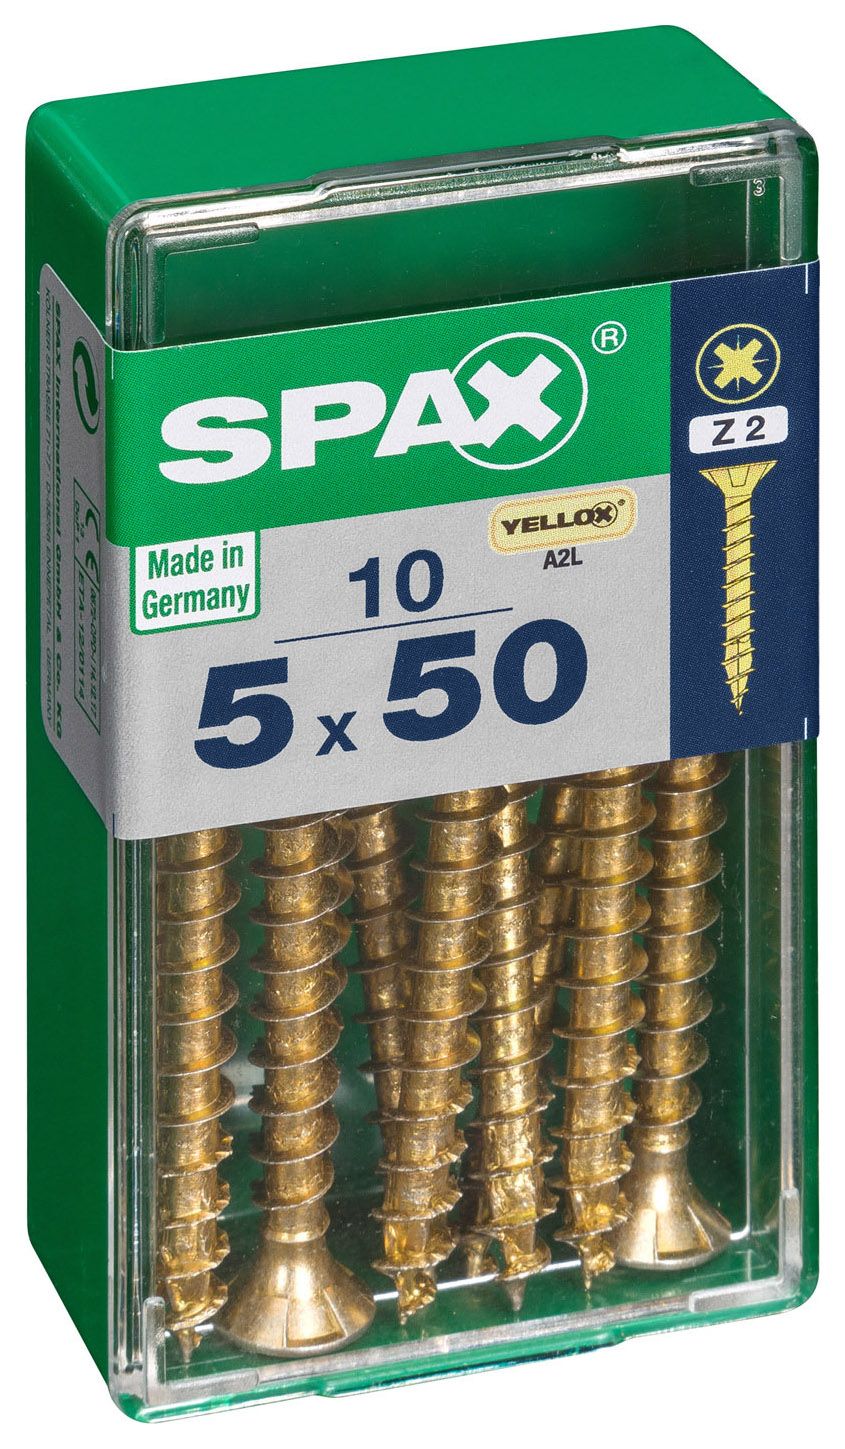 Image of Spax Pz Countersunk Zinc Yellow Screws - 5 X 50mm Pack Of 10